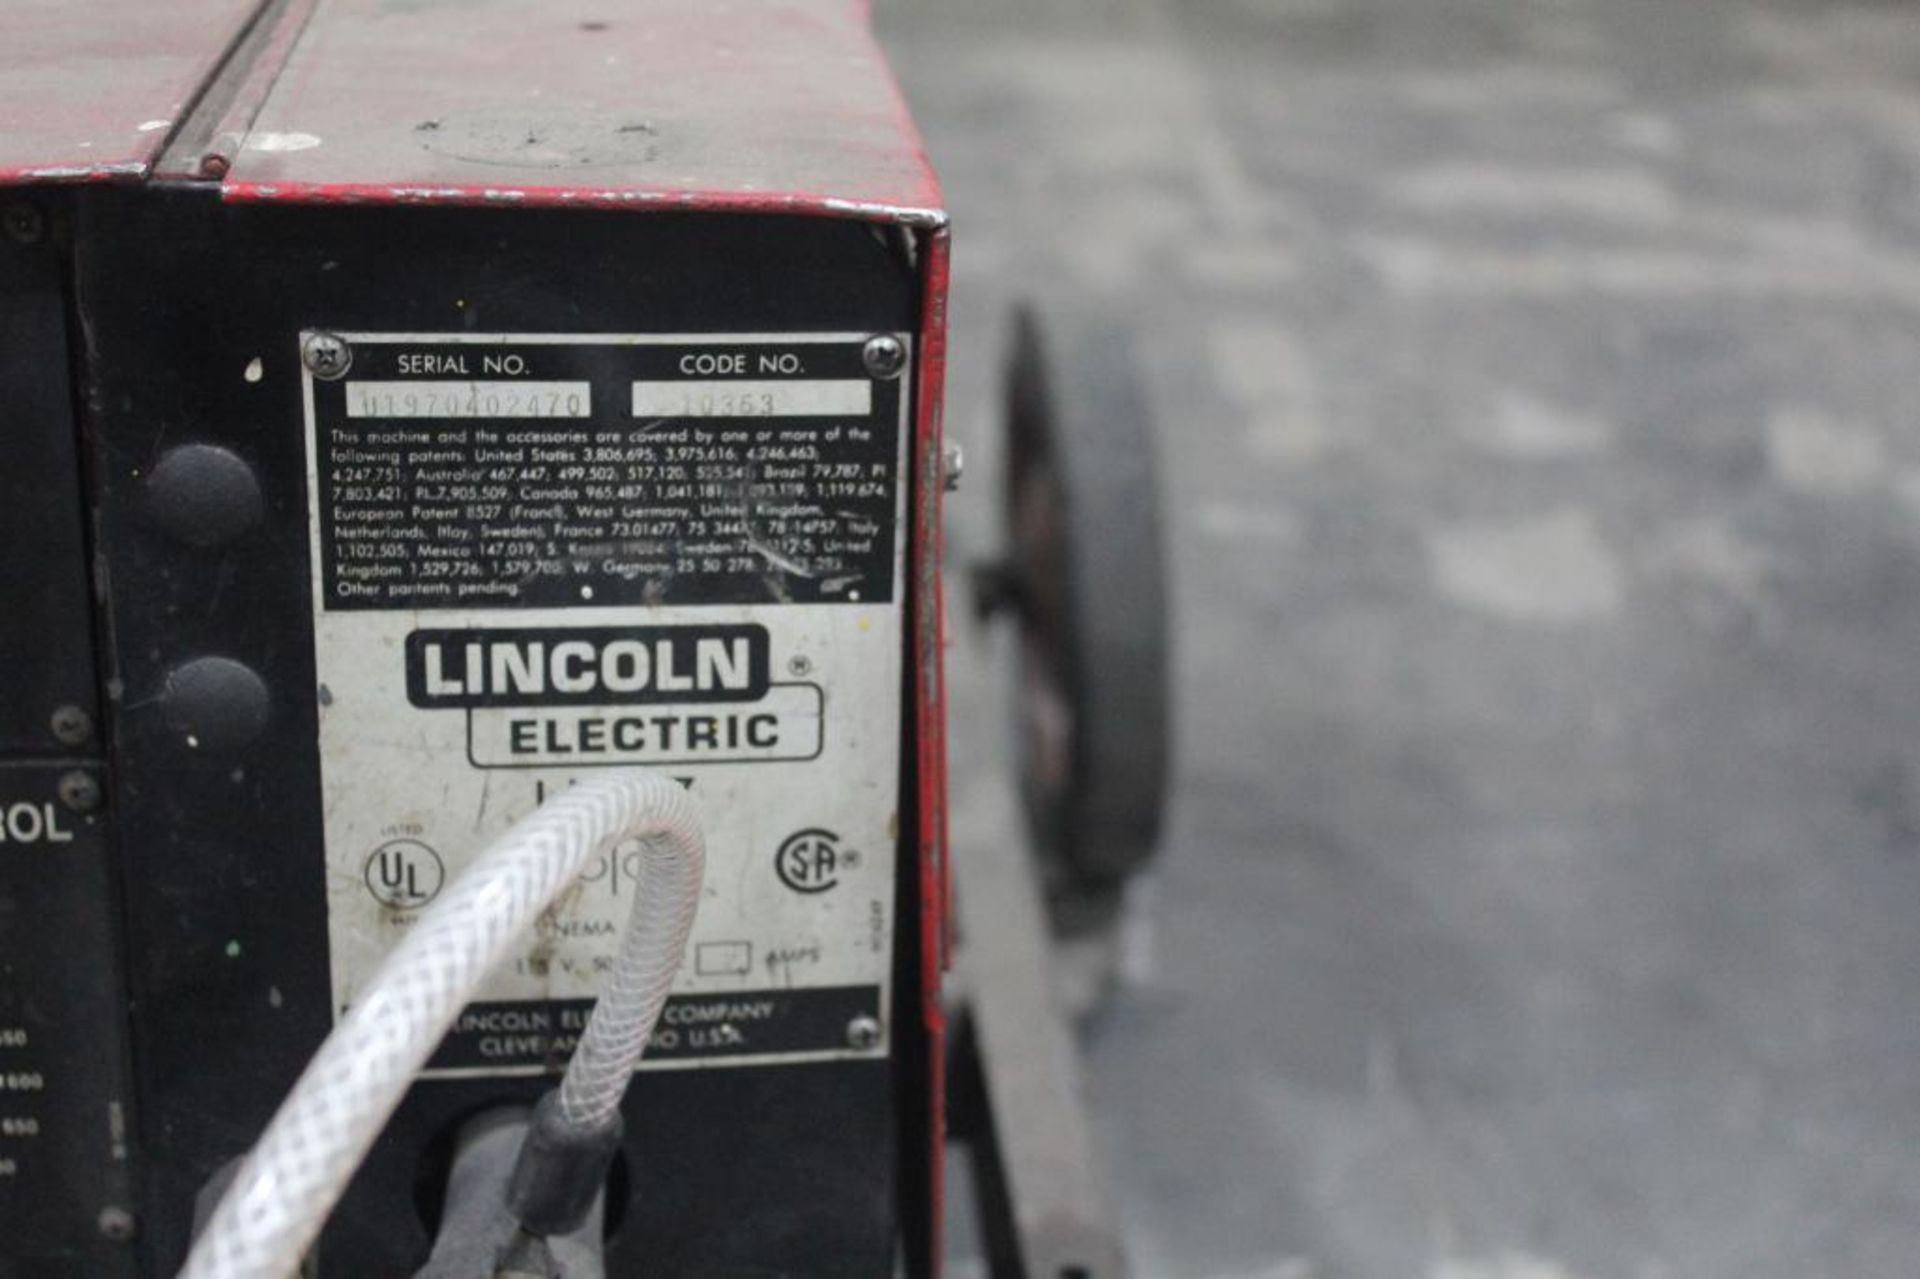 LINCOLN ELECTRIC IDEALARC DC-600 WELDER SN.U1091104152 230-460V WITH LN-7 WIRE FEED SN.U1970402470 - Image 6 of 10